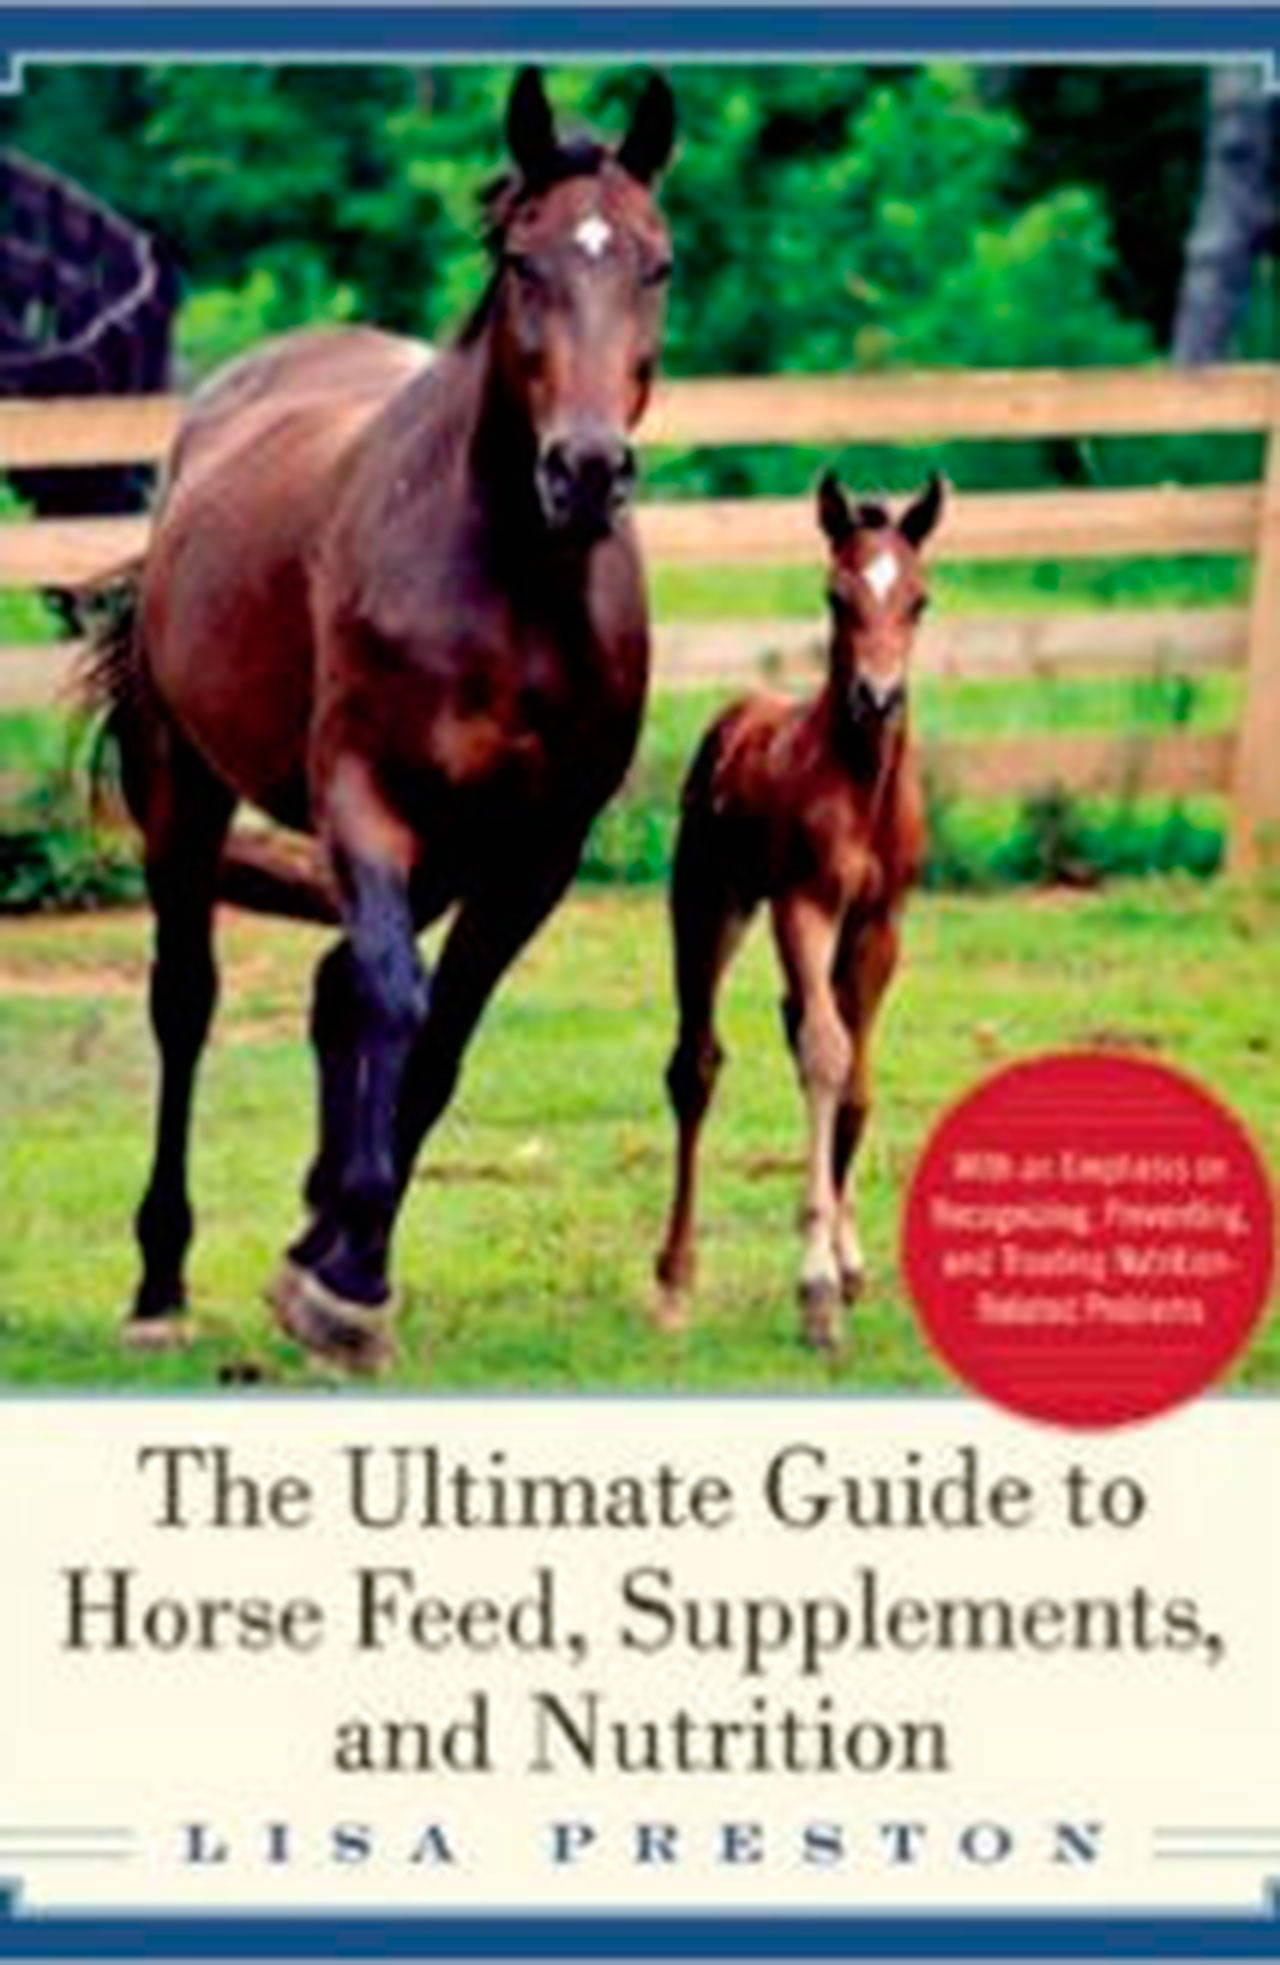 “The Ultimate Guide to Horse Feed, Supplements, and Nutrition” is now in its second print run. Photo courtesy of Lisa Preston